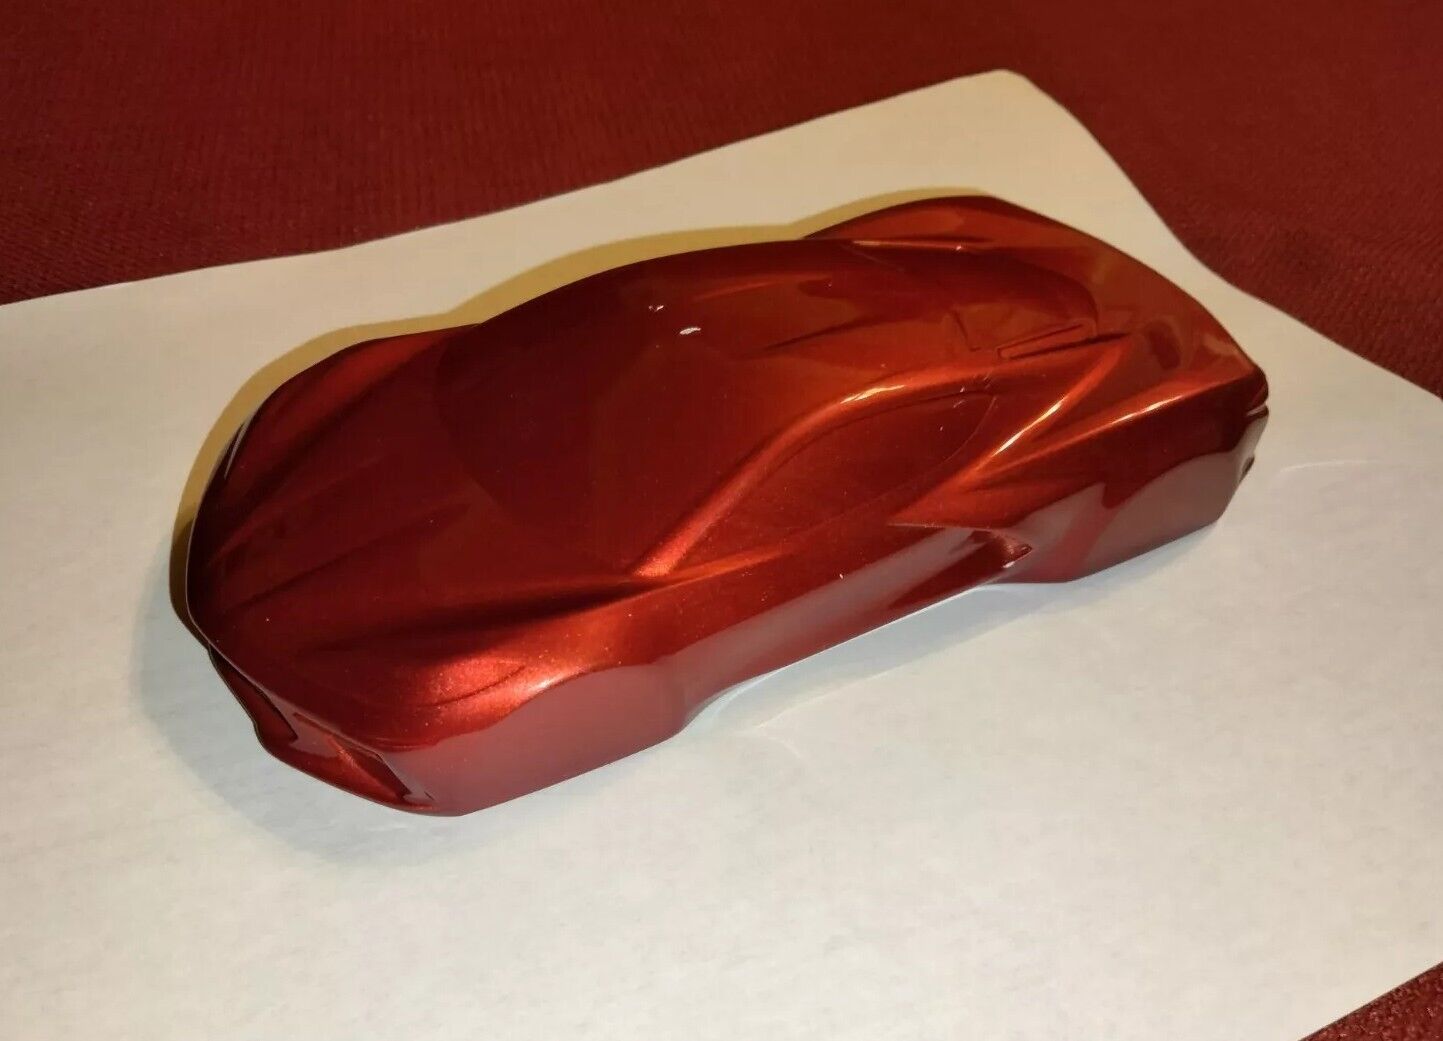 Red Chevy Corvette C8 speed form car model figurine enamelled, *read has chips 